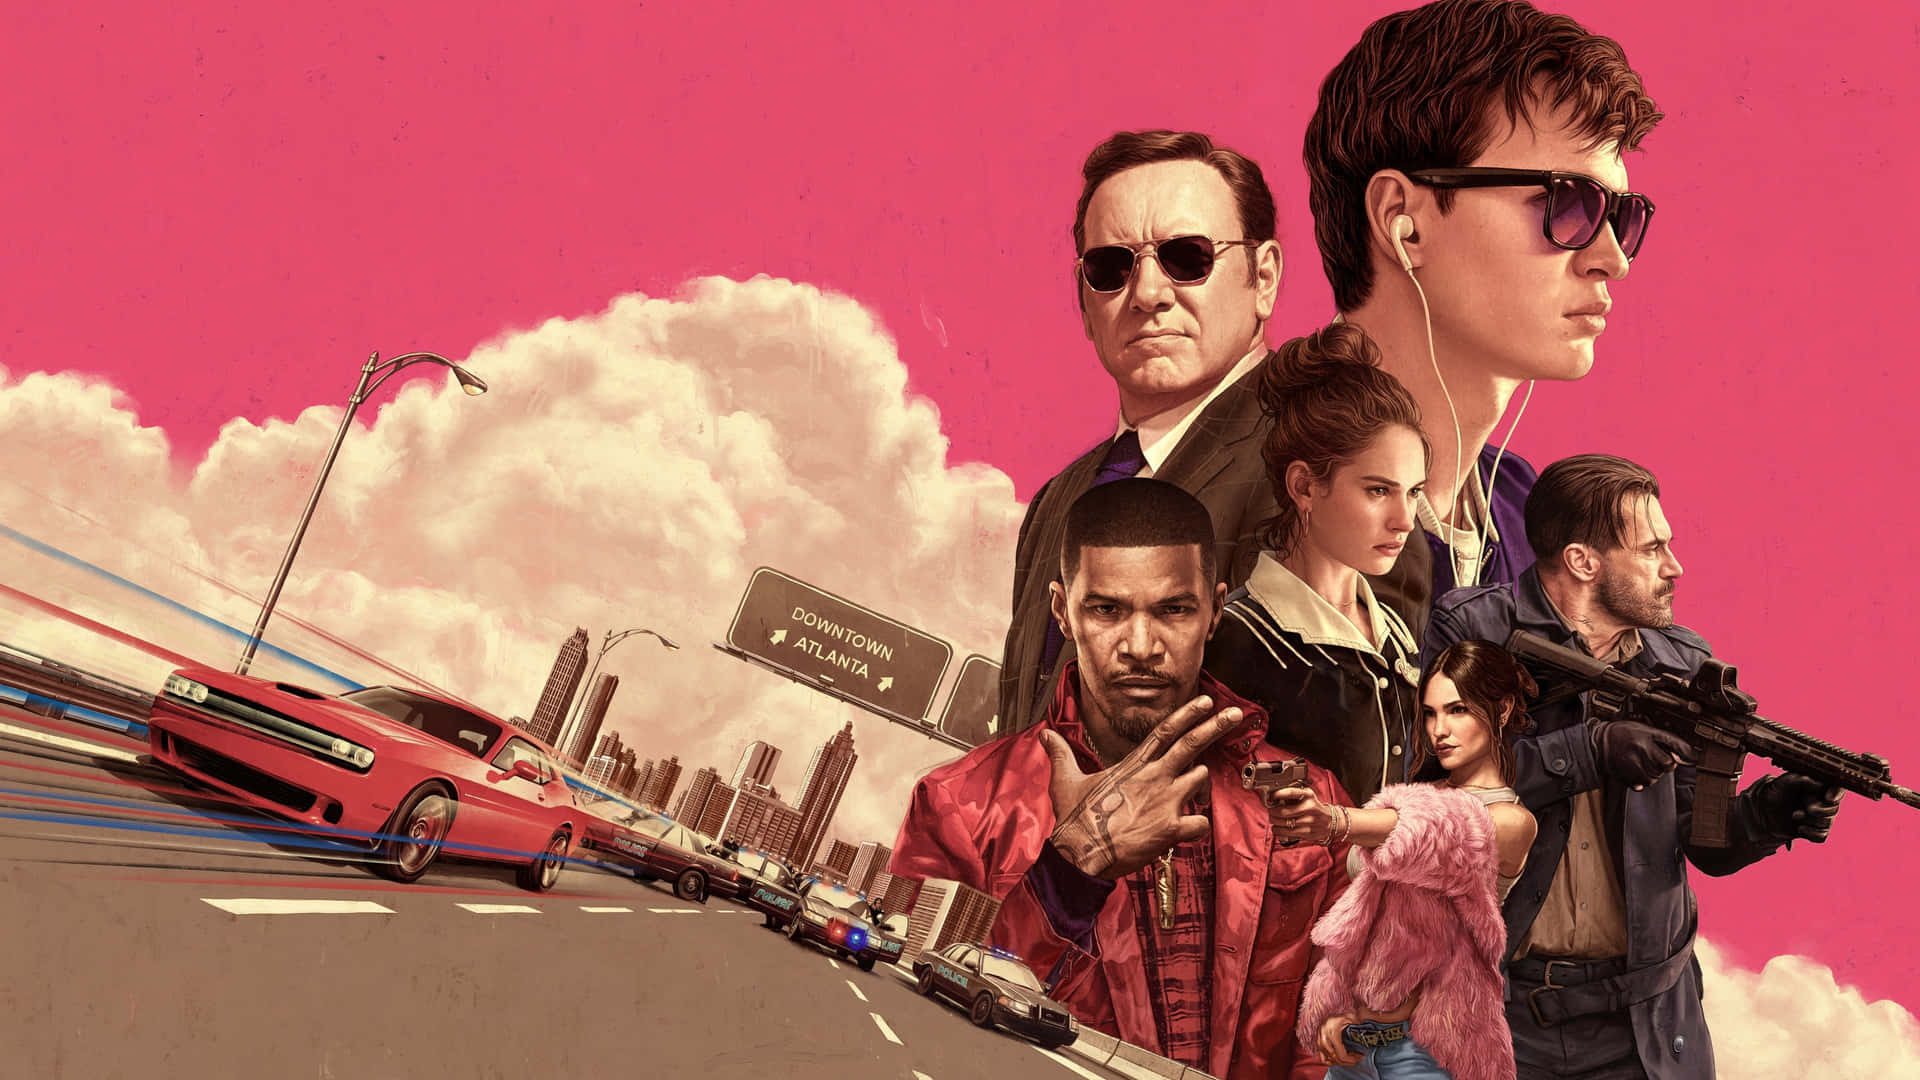 Baby Driver - Adrenaline-fueled Car Chase Scene Wallpaper